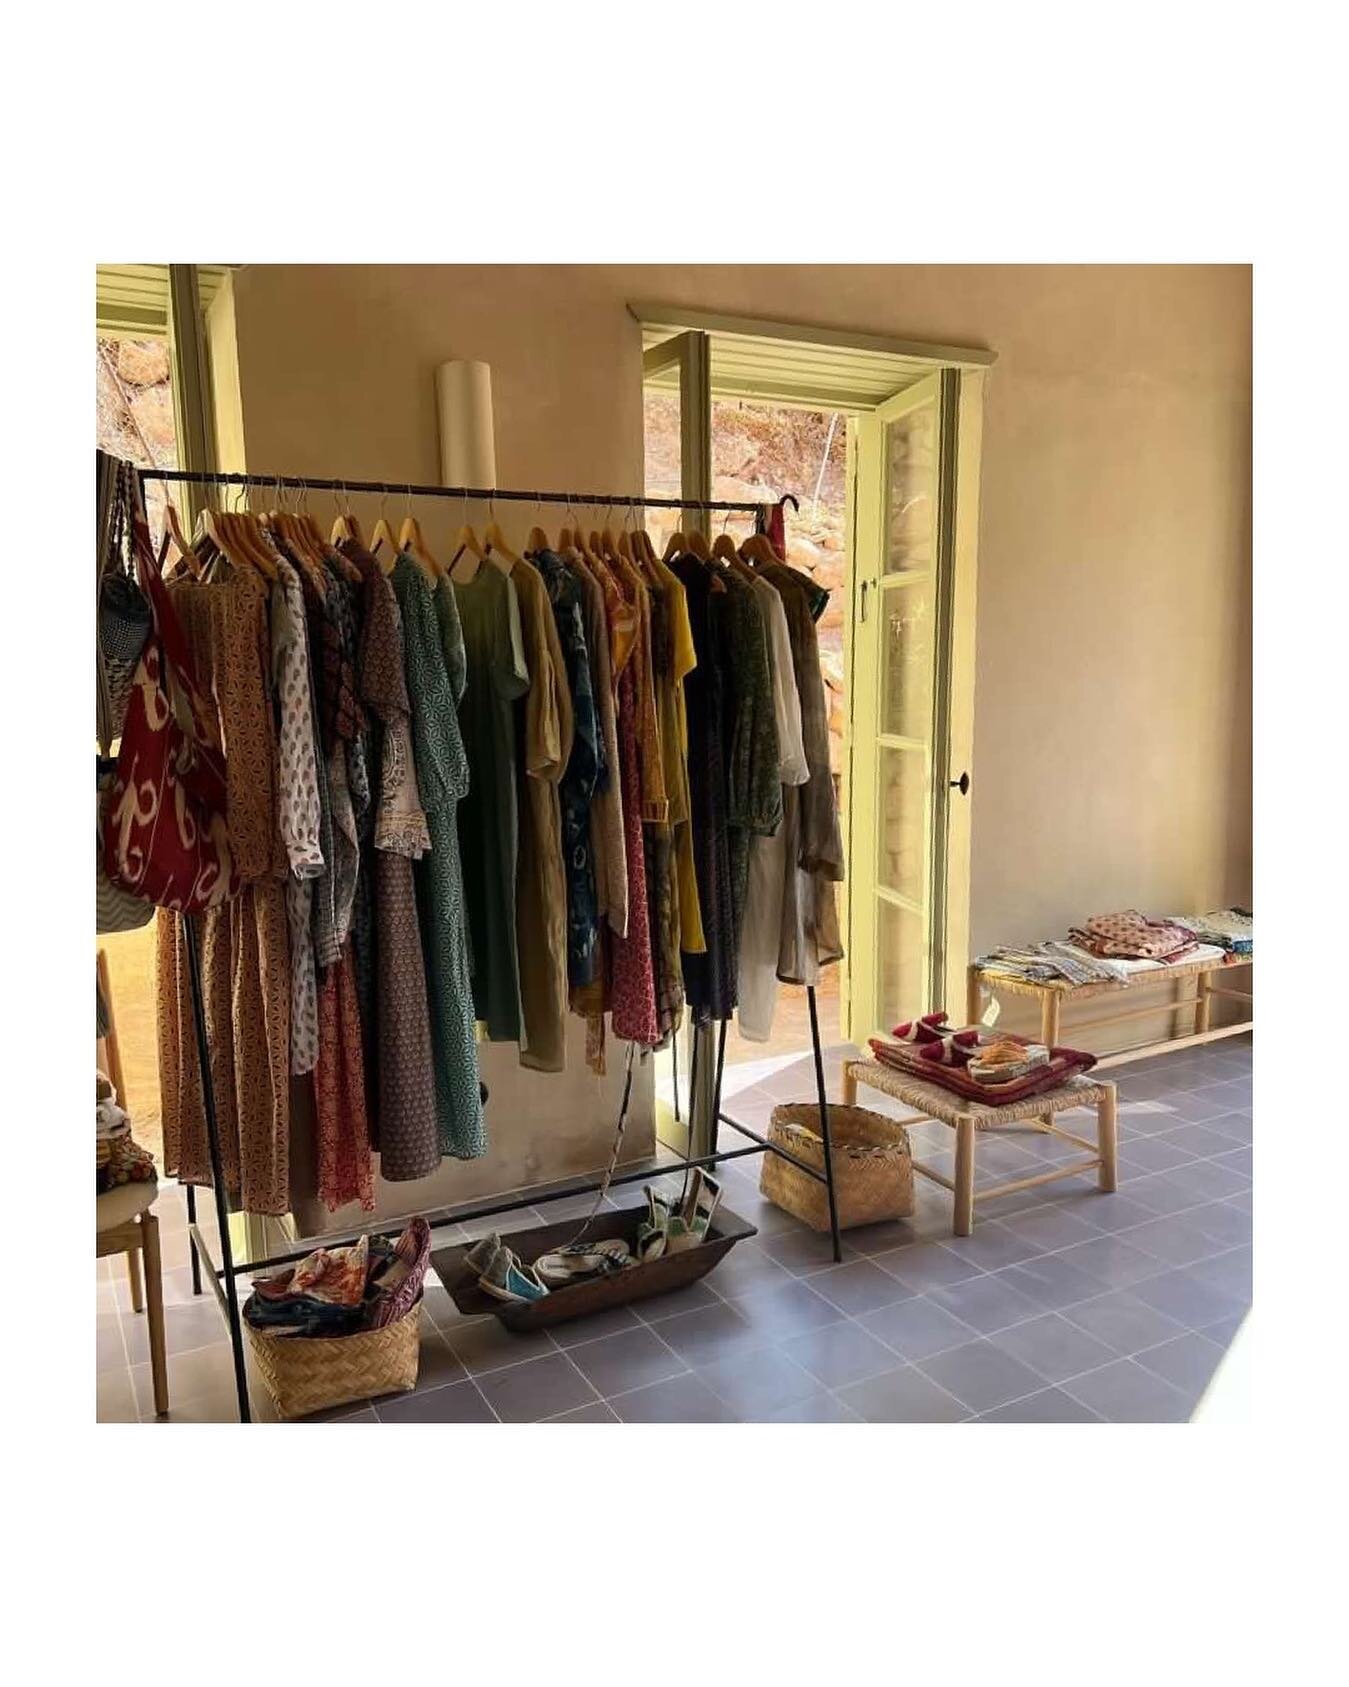 We have also curated a small selection of stylish vacation clothing and accessories for you!
At Casa Mediterraneo everything is synonymous to effortless style!

Welcome to Casa Mediterraneo.
Book your stay and discover more  at www.casamediterraneoho